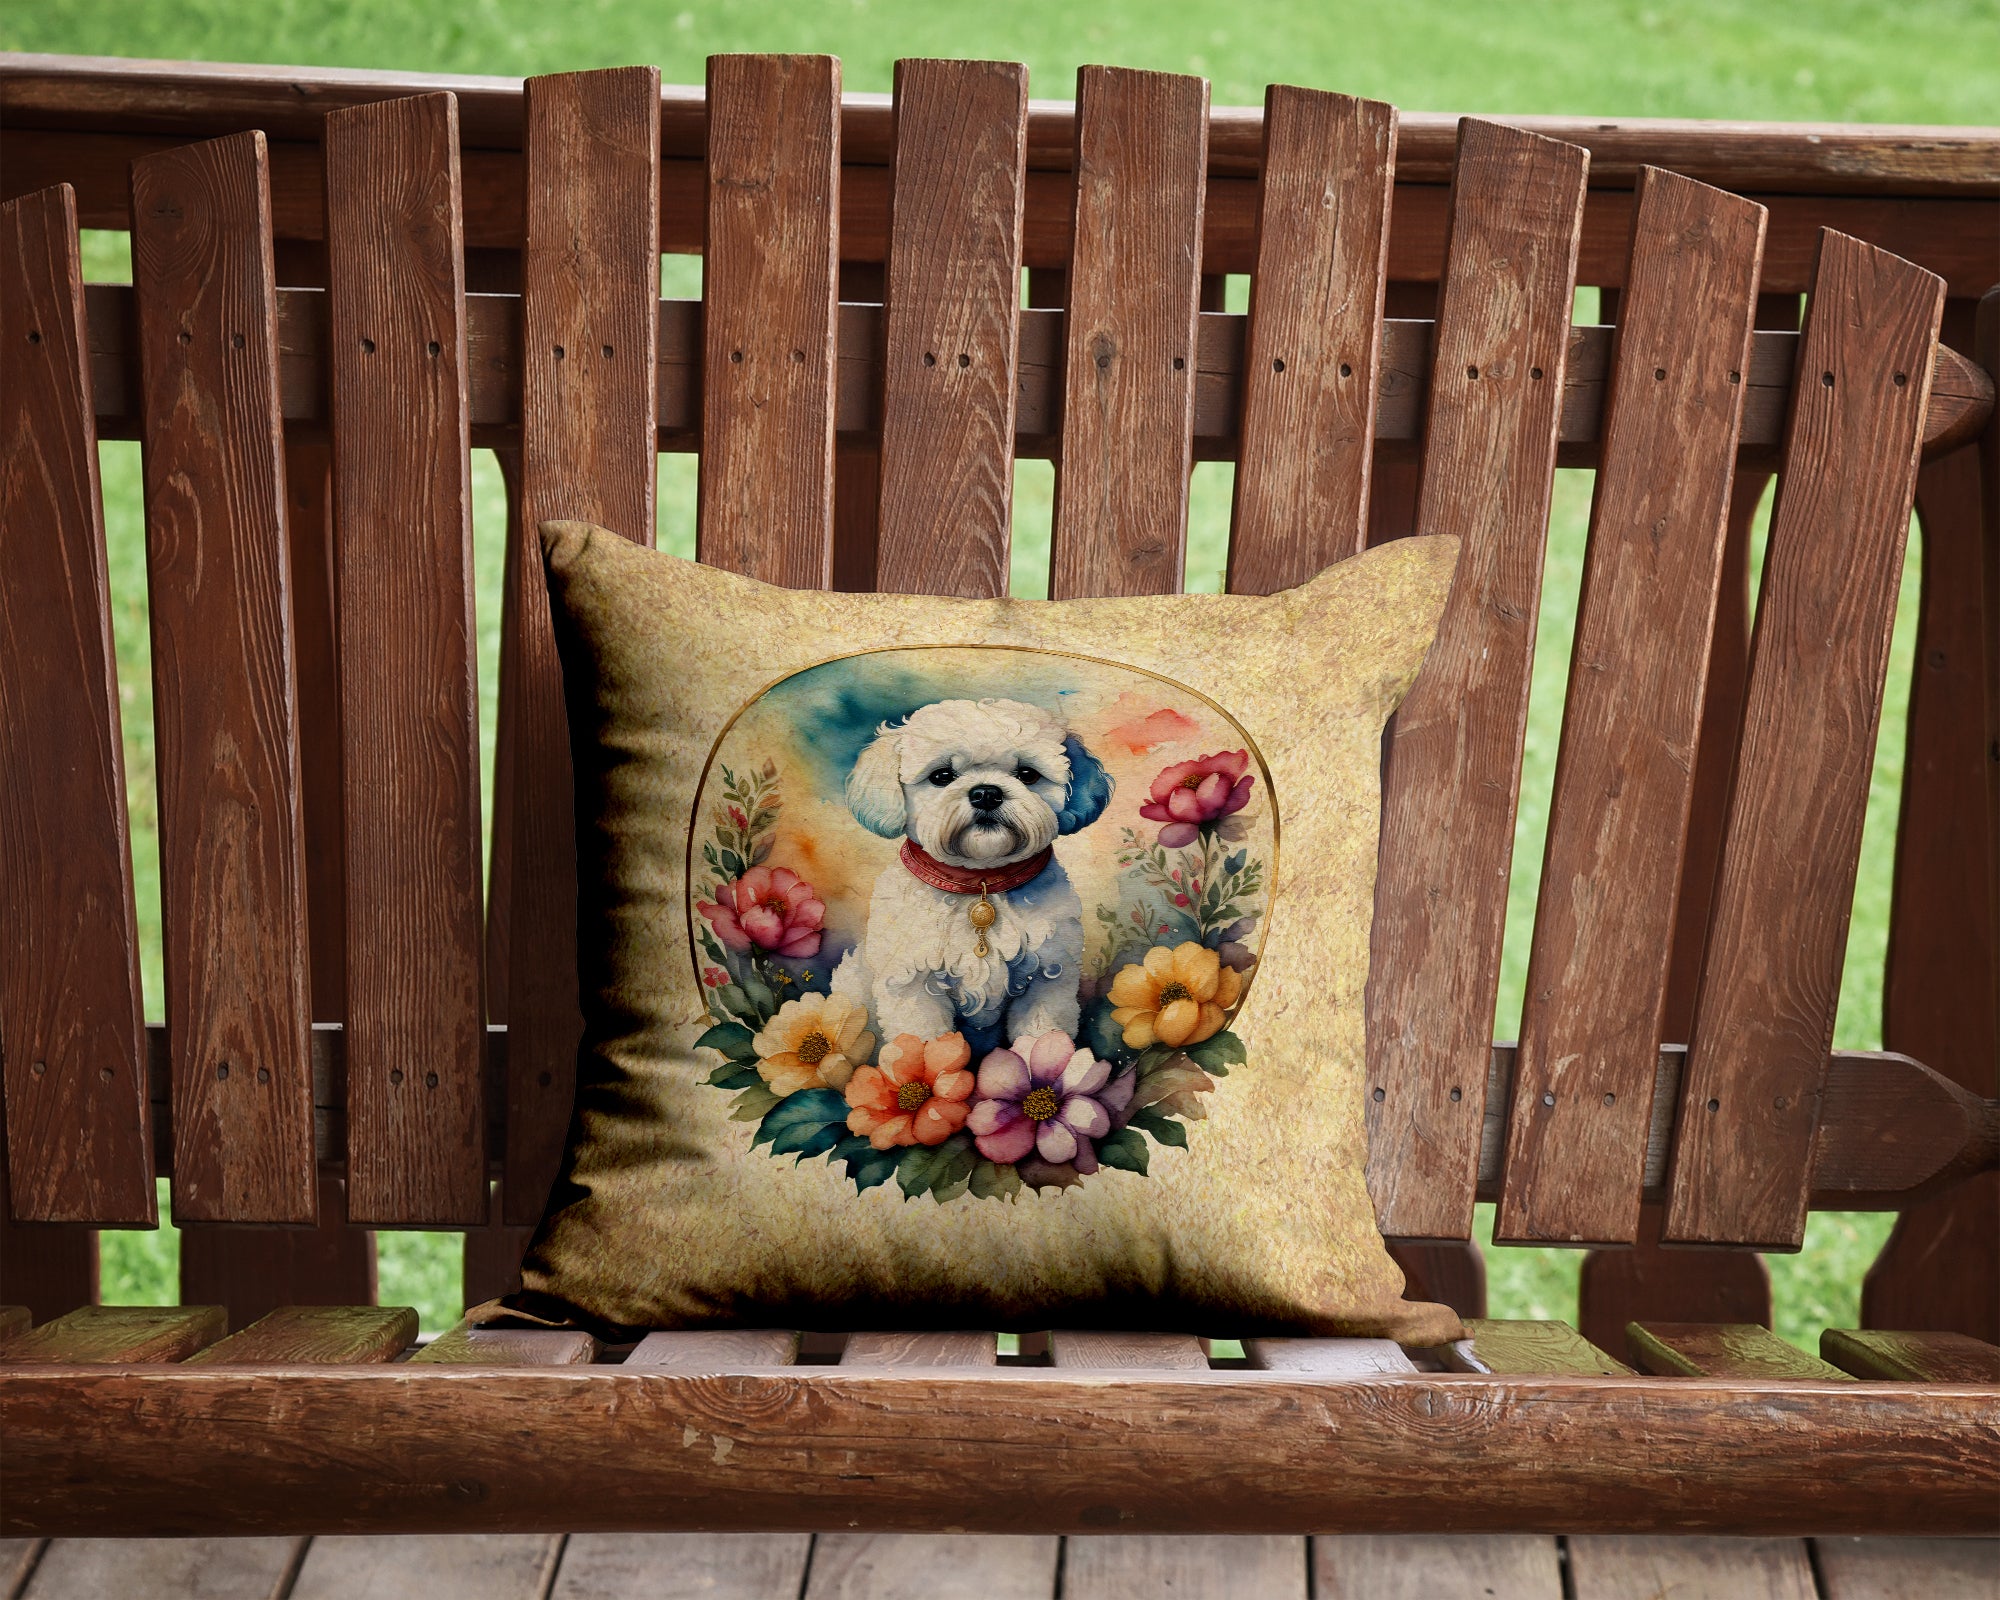 Buy this Bichon Frise and Flowers Fabric Decorative Pillow